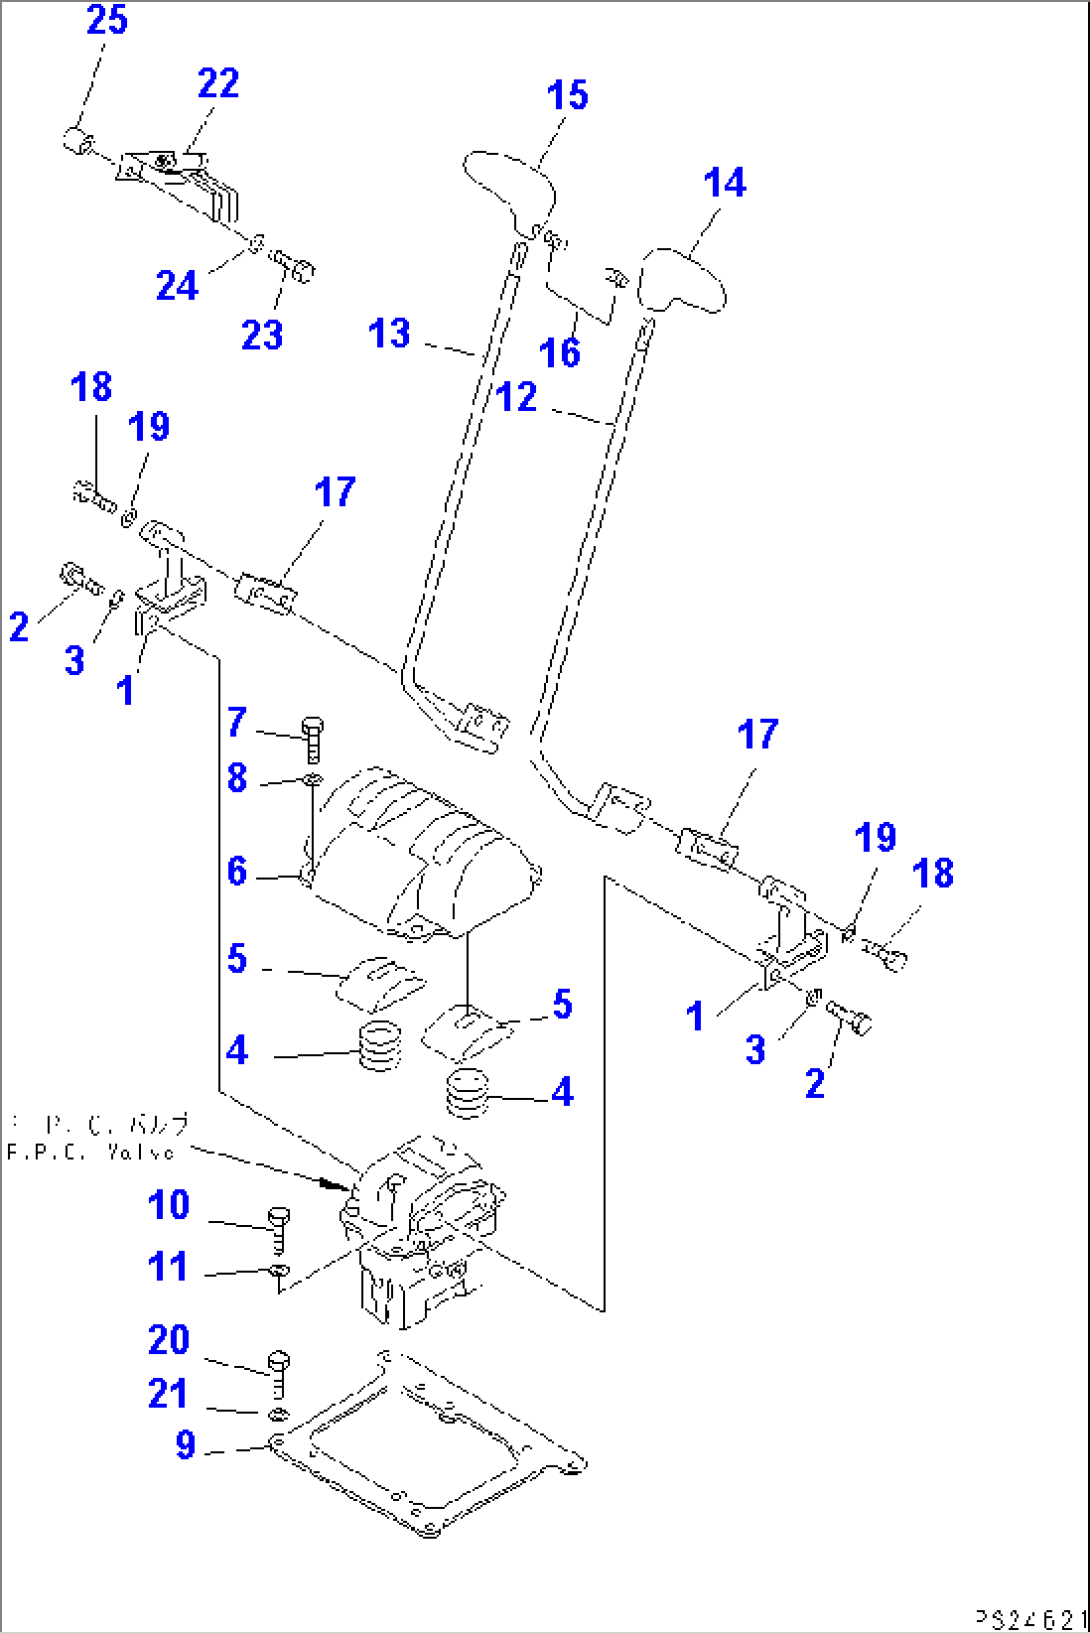 TRAVEL CONTROL LEVER AND LINKAGE(#1202-)